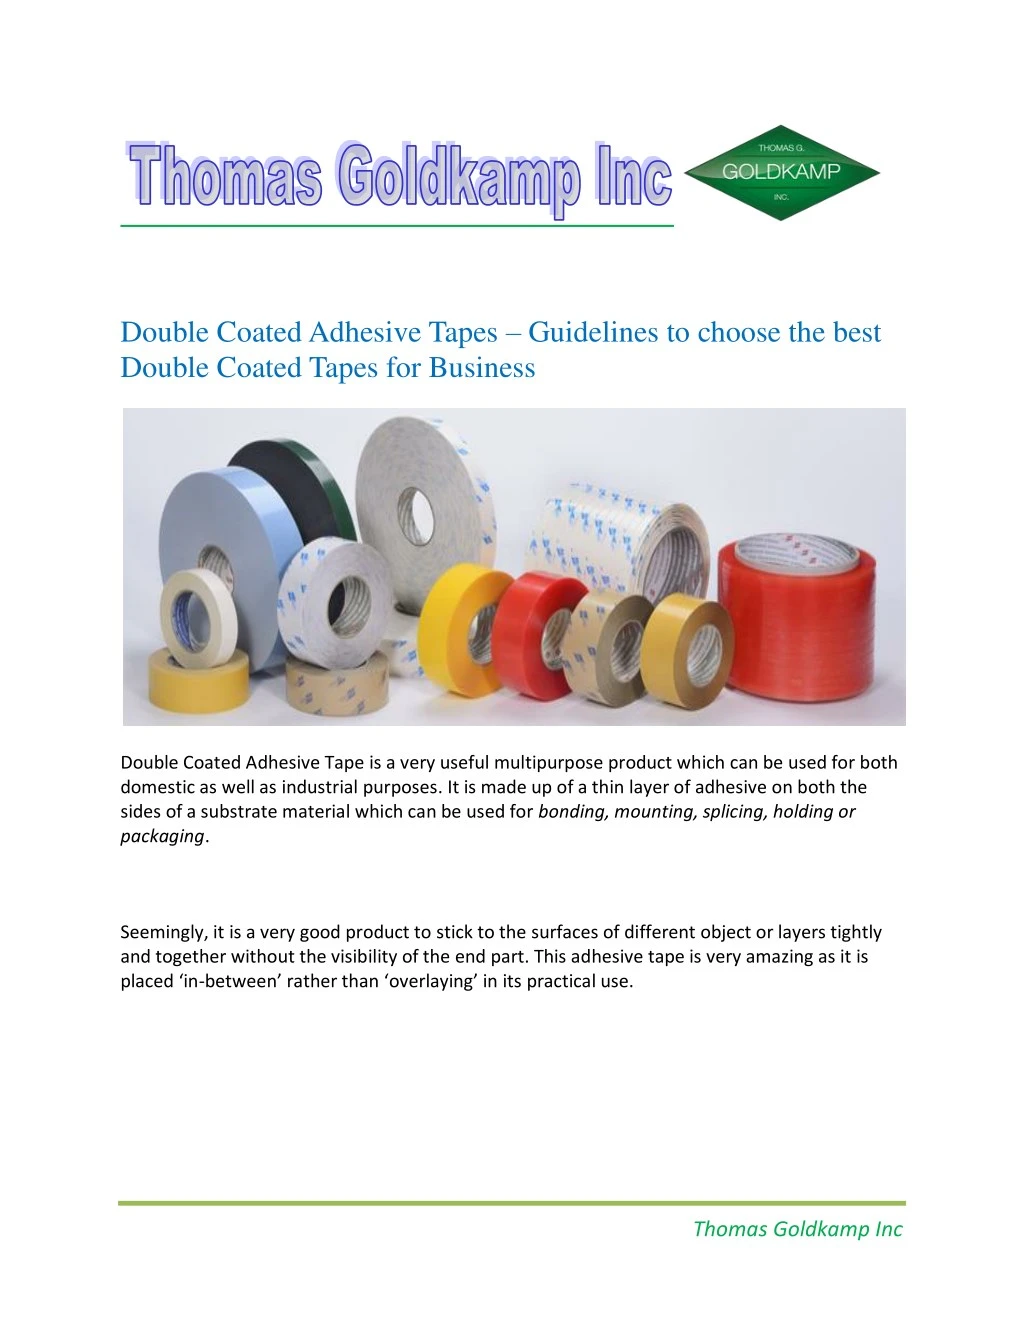 double coated adhesive tapes guidelines to choose